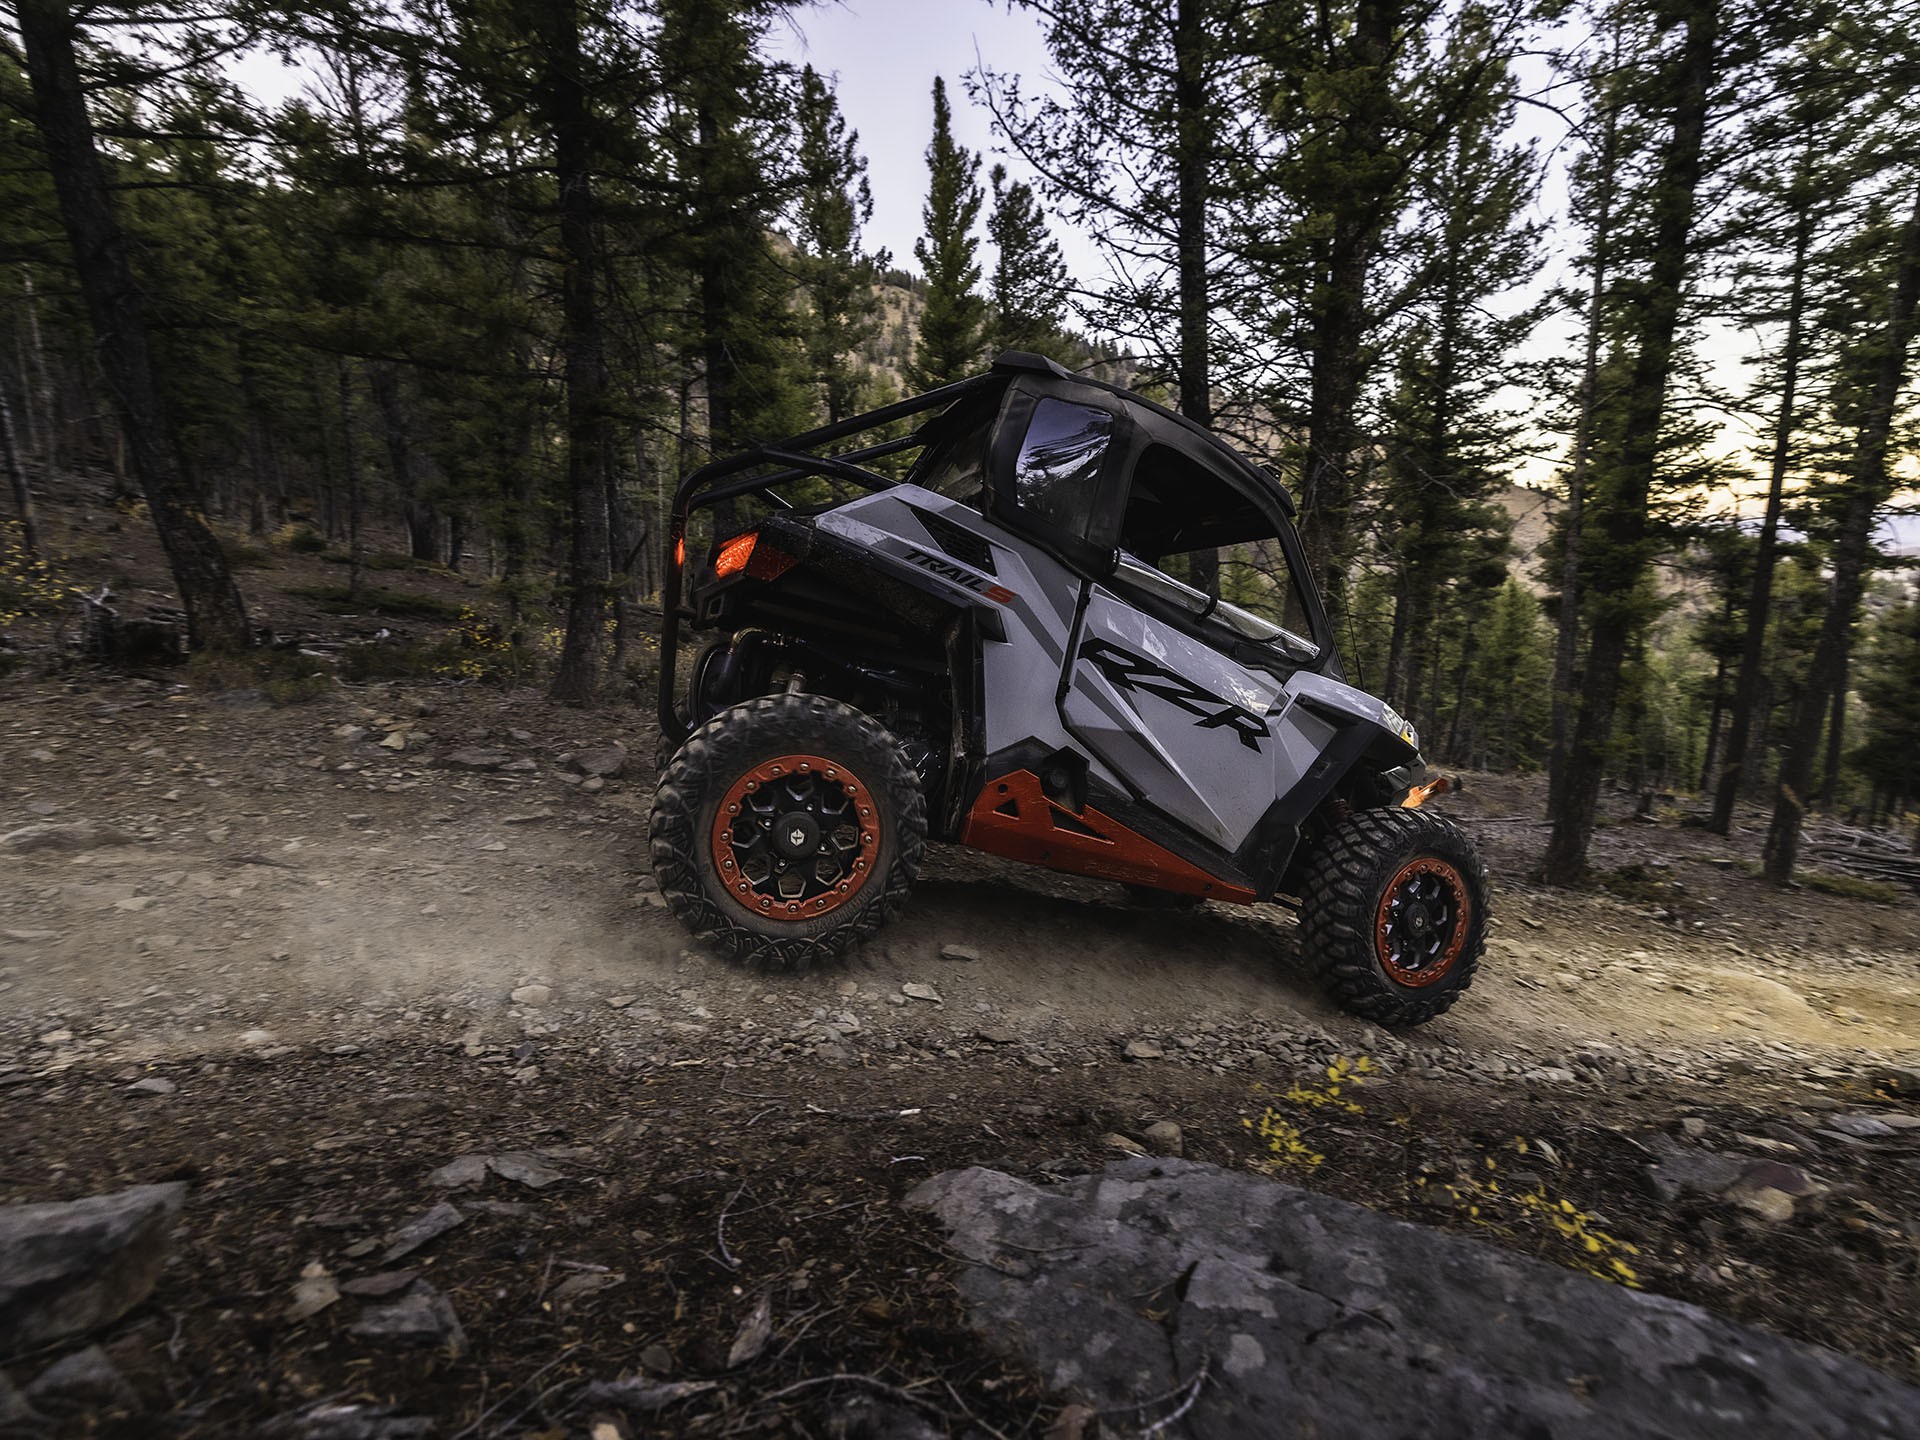 2023 Polaris RZR Trail S 1000 Ultimate in Liberty, New York - Photo 4